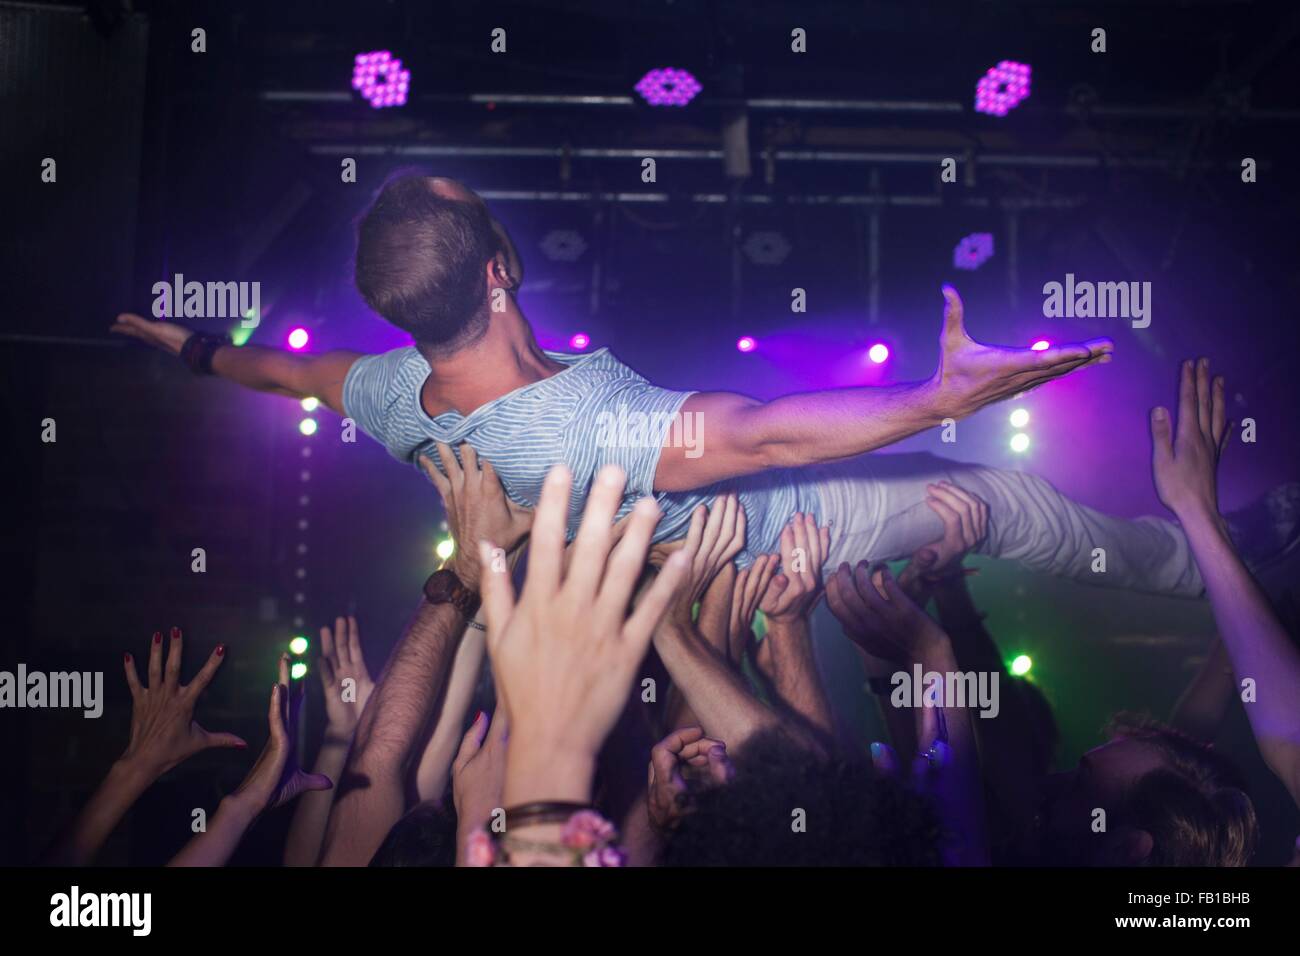 Group of people lifting man in club Stock Photo